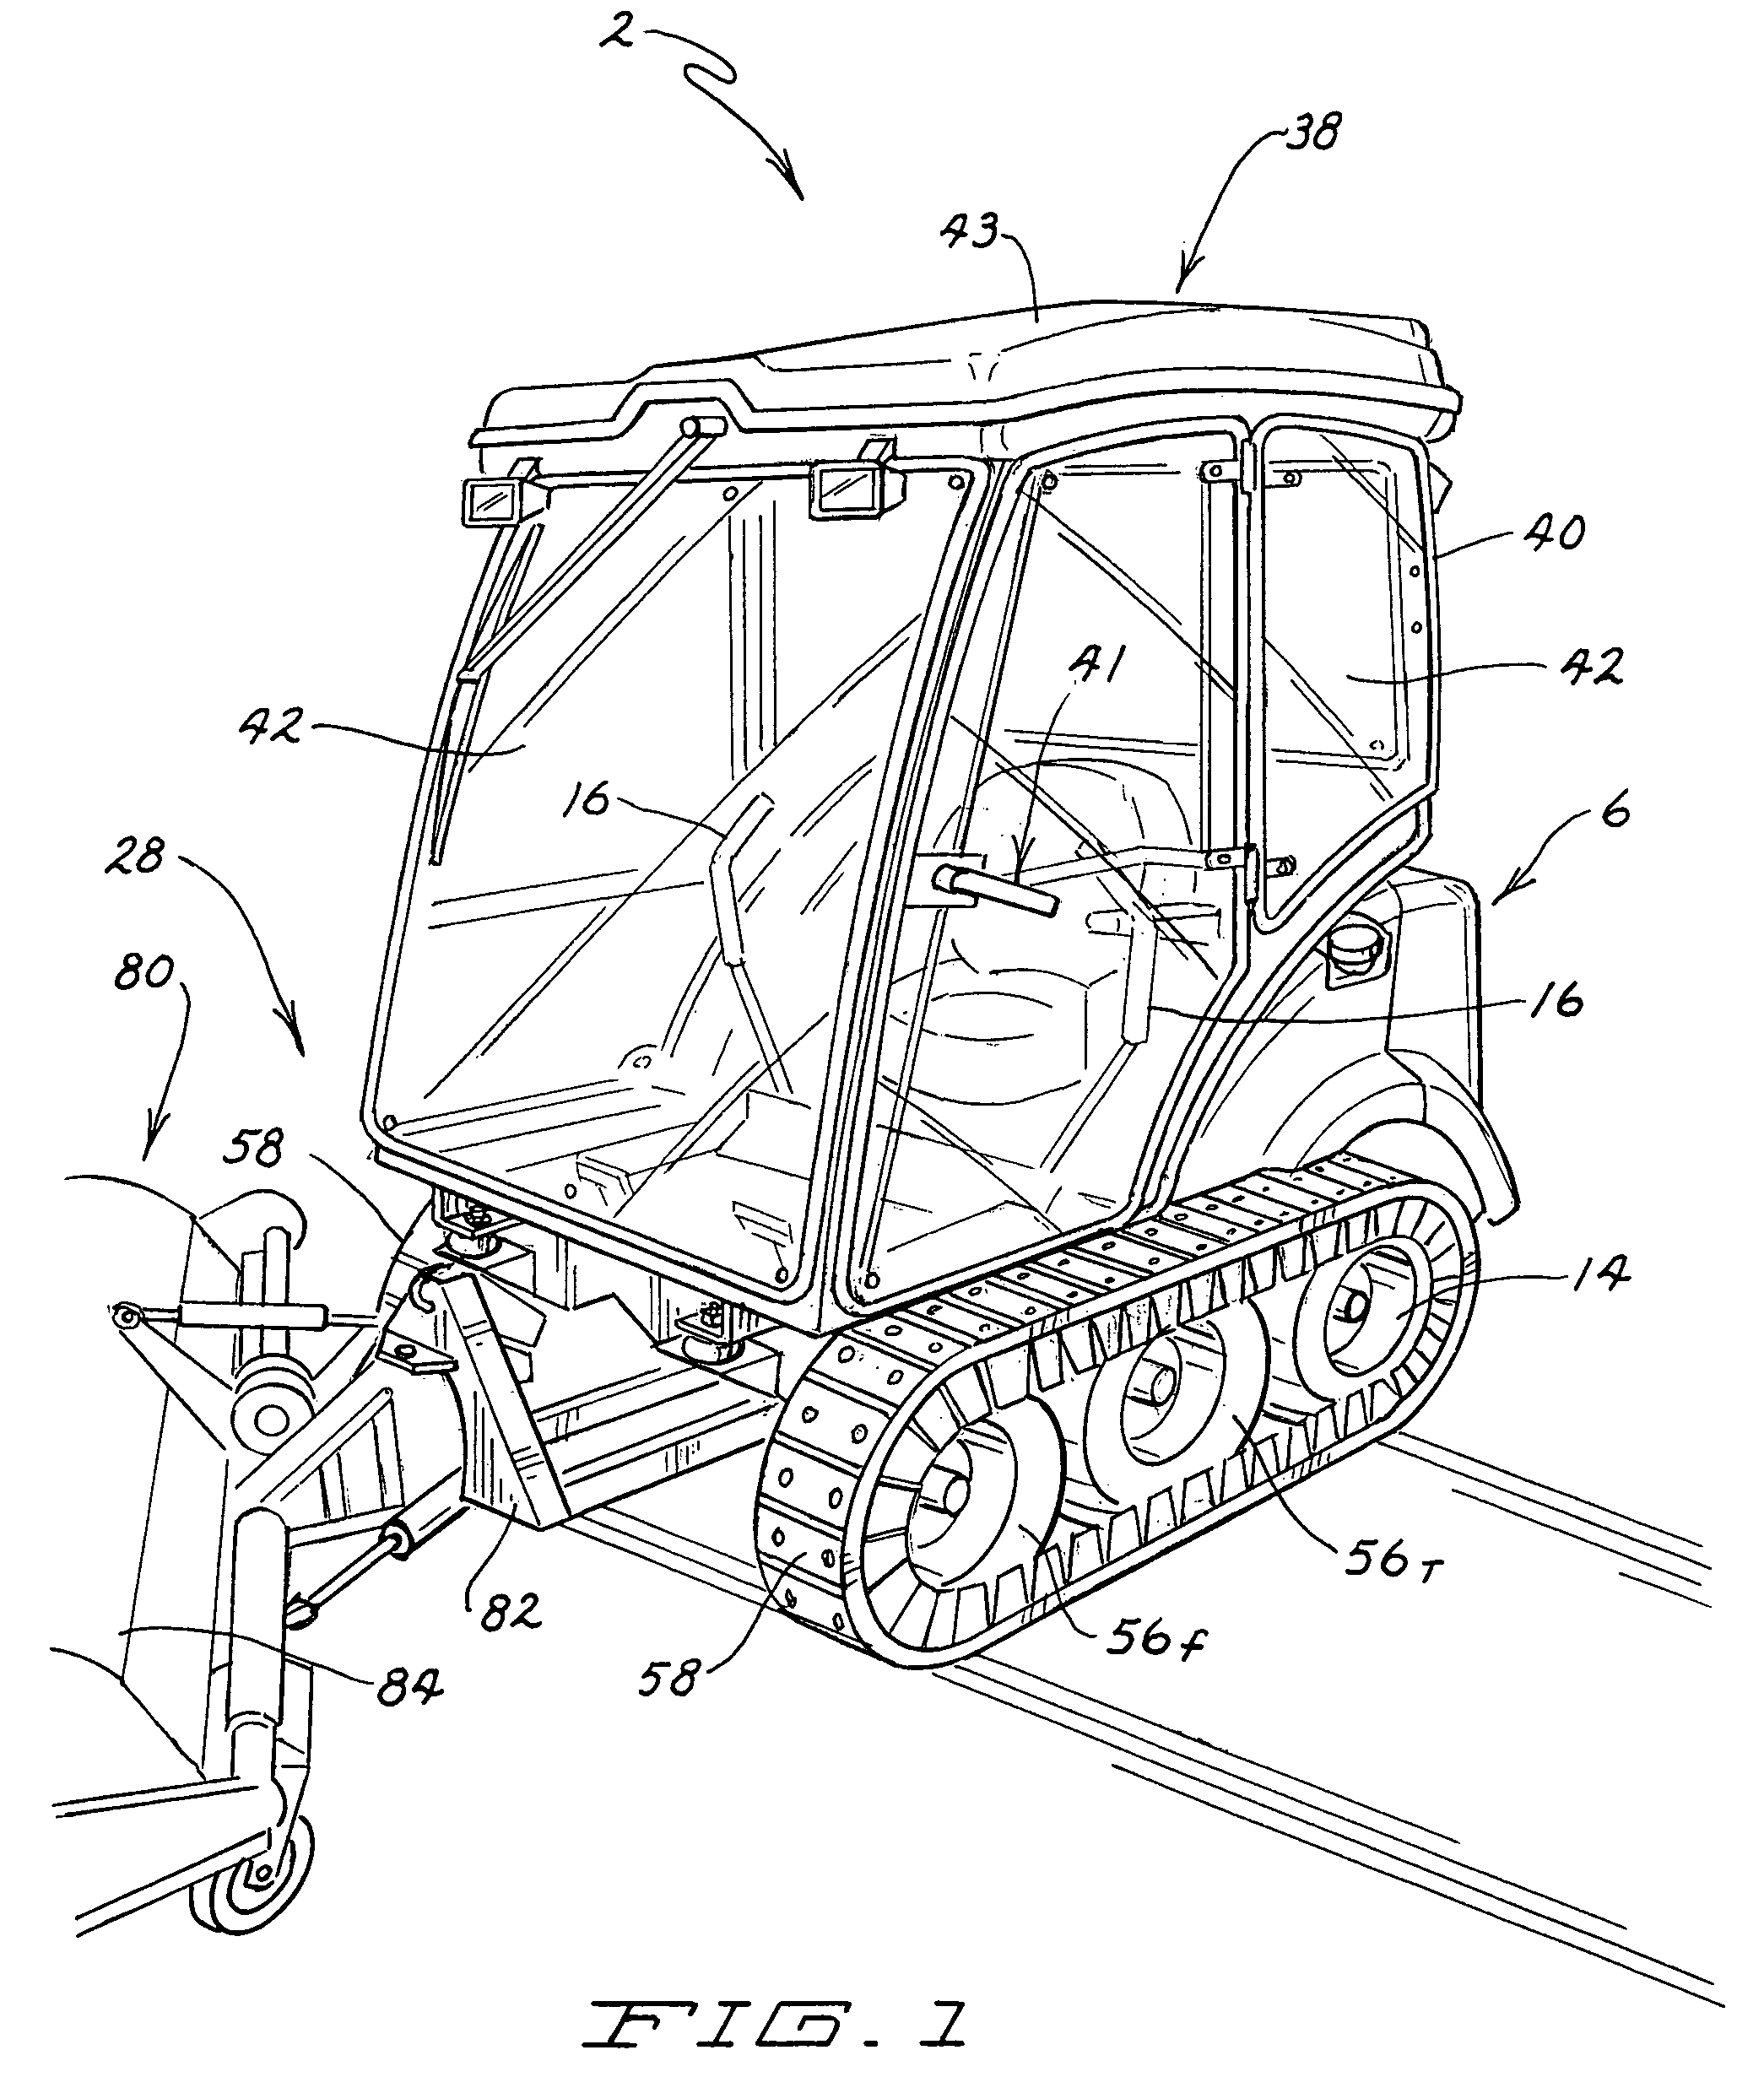 Tracked implement with pivotal front and trailing idlers and powered rear drive member